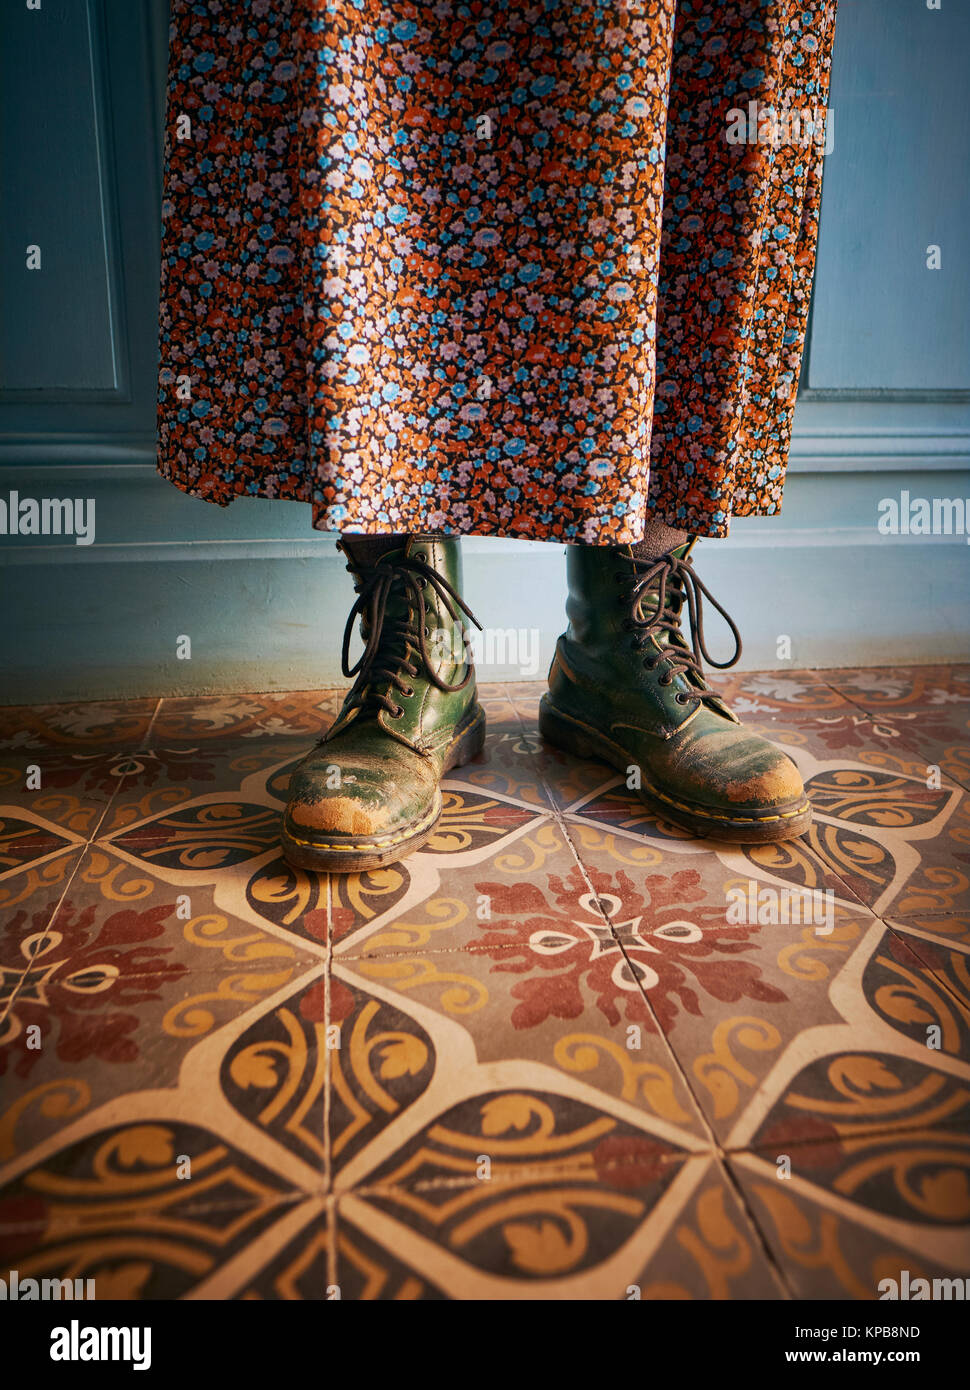 Wearing worn green Dr Martens boots / shoes with a skirt in a rustic style  french house interior - work boots - odd - quirky style Stock Photo - Alamy